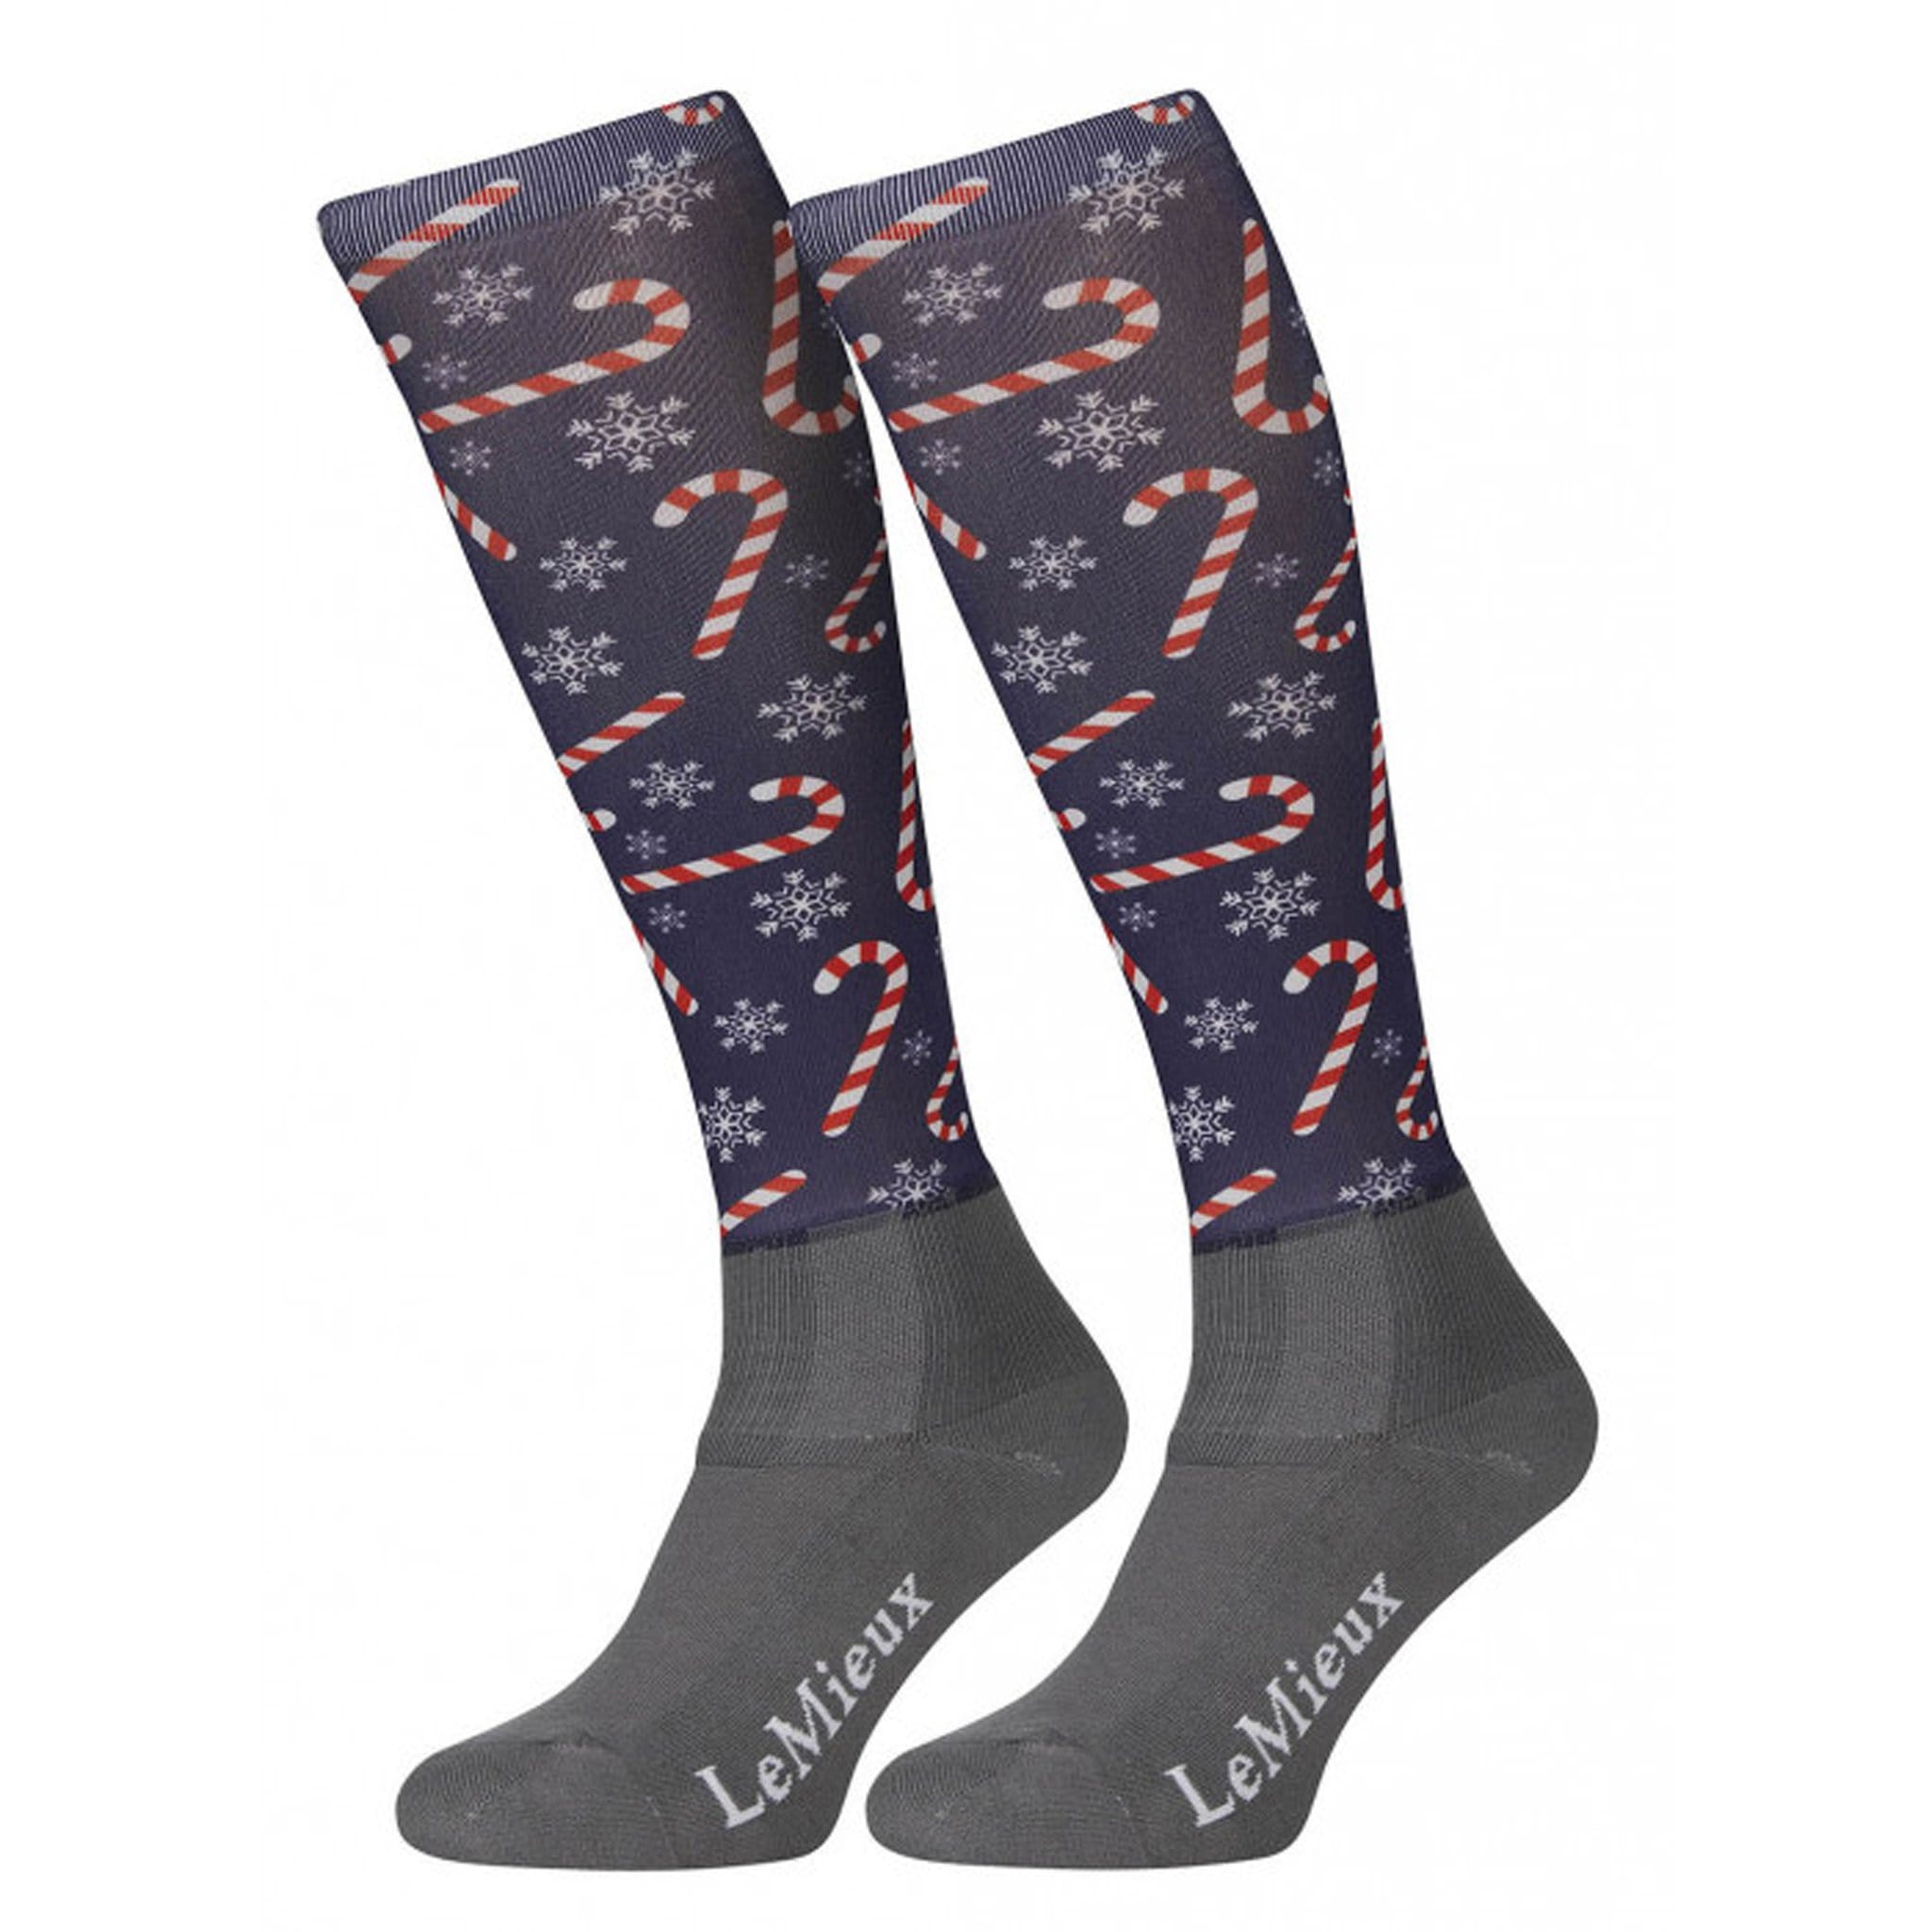 LeMieux Children's Footsie Candy Canes Riding Socks 3693 Grey and Navy